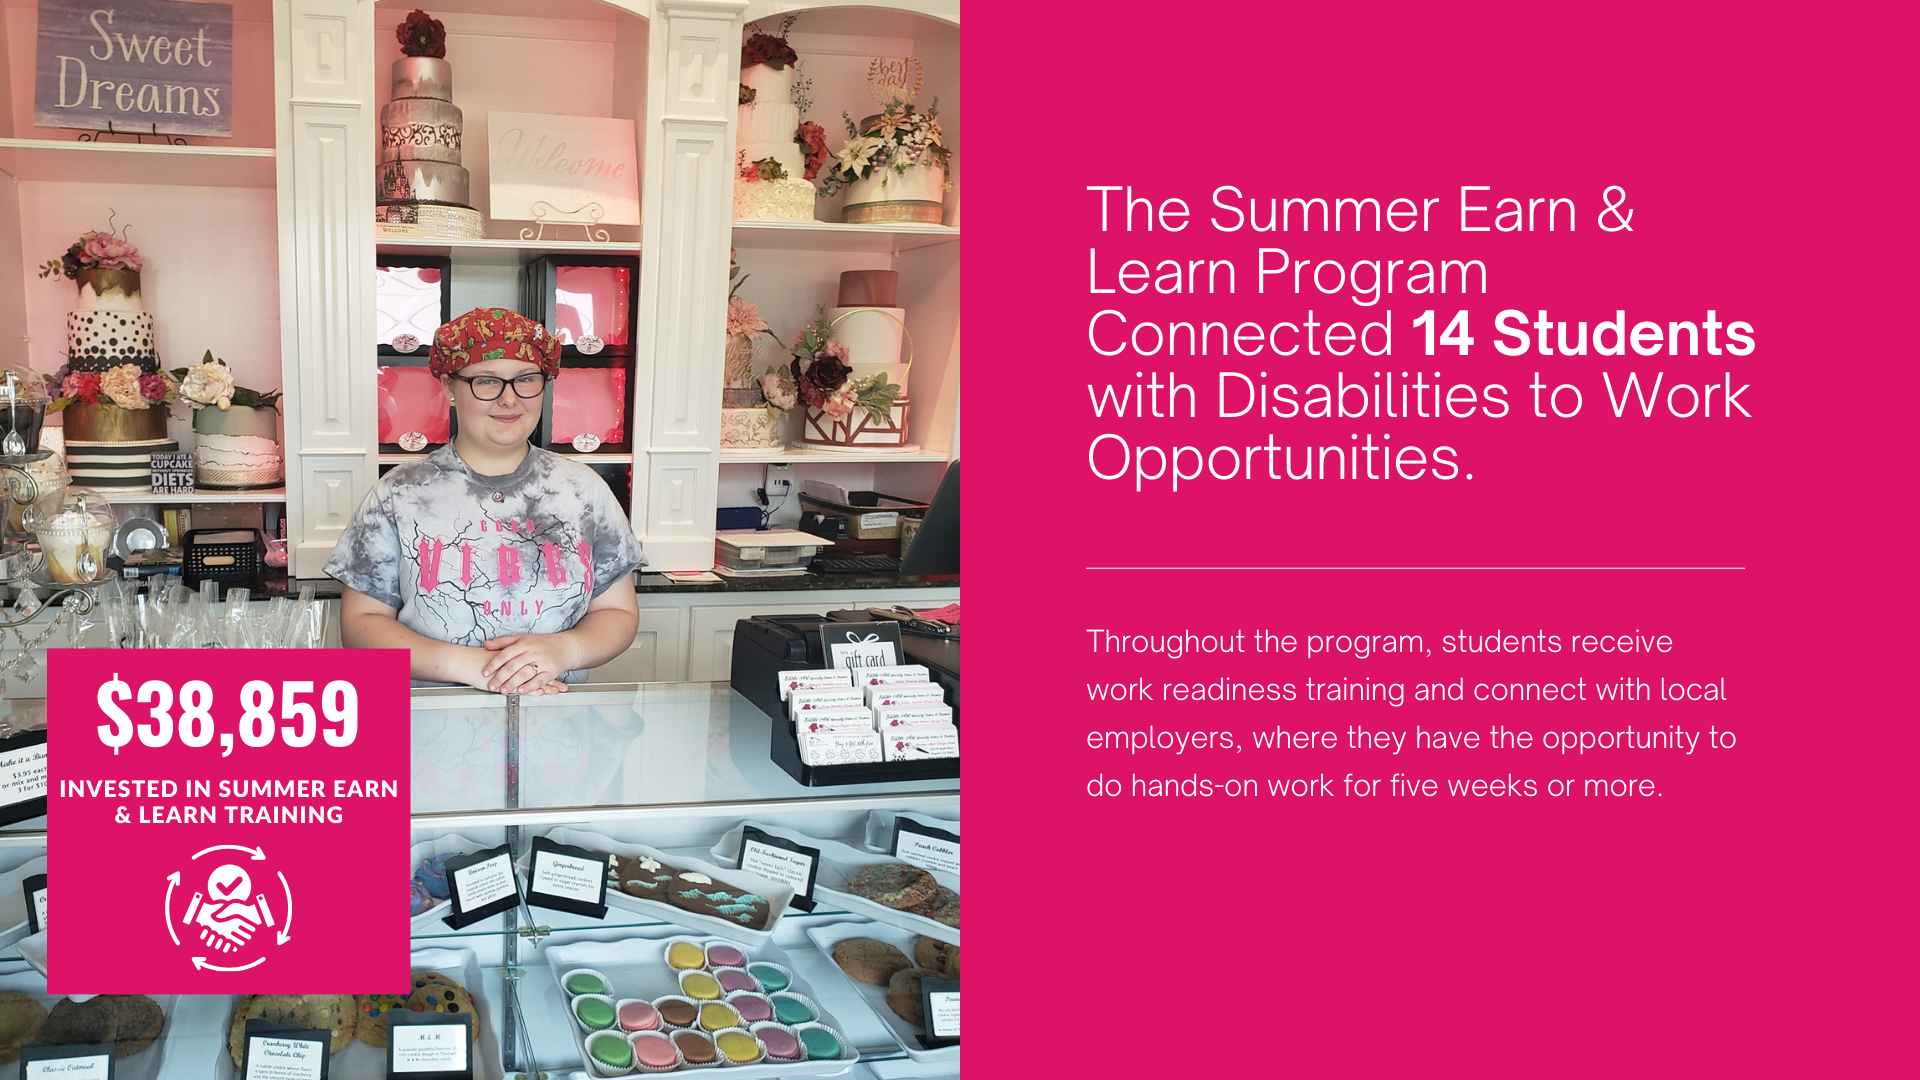 The summer earn and learn program is connected to 14 students with disabilities to work opportunities